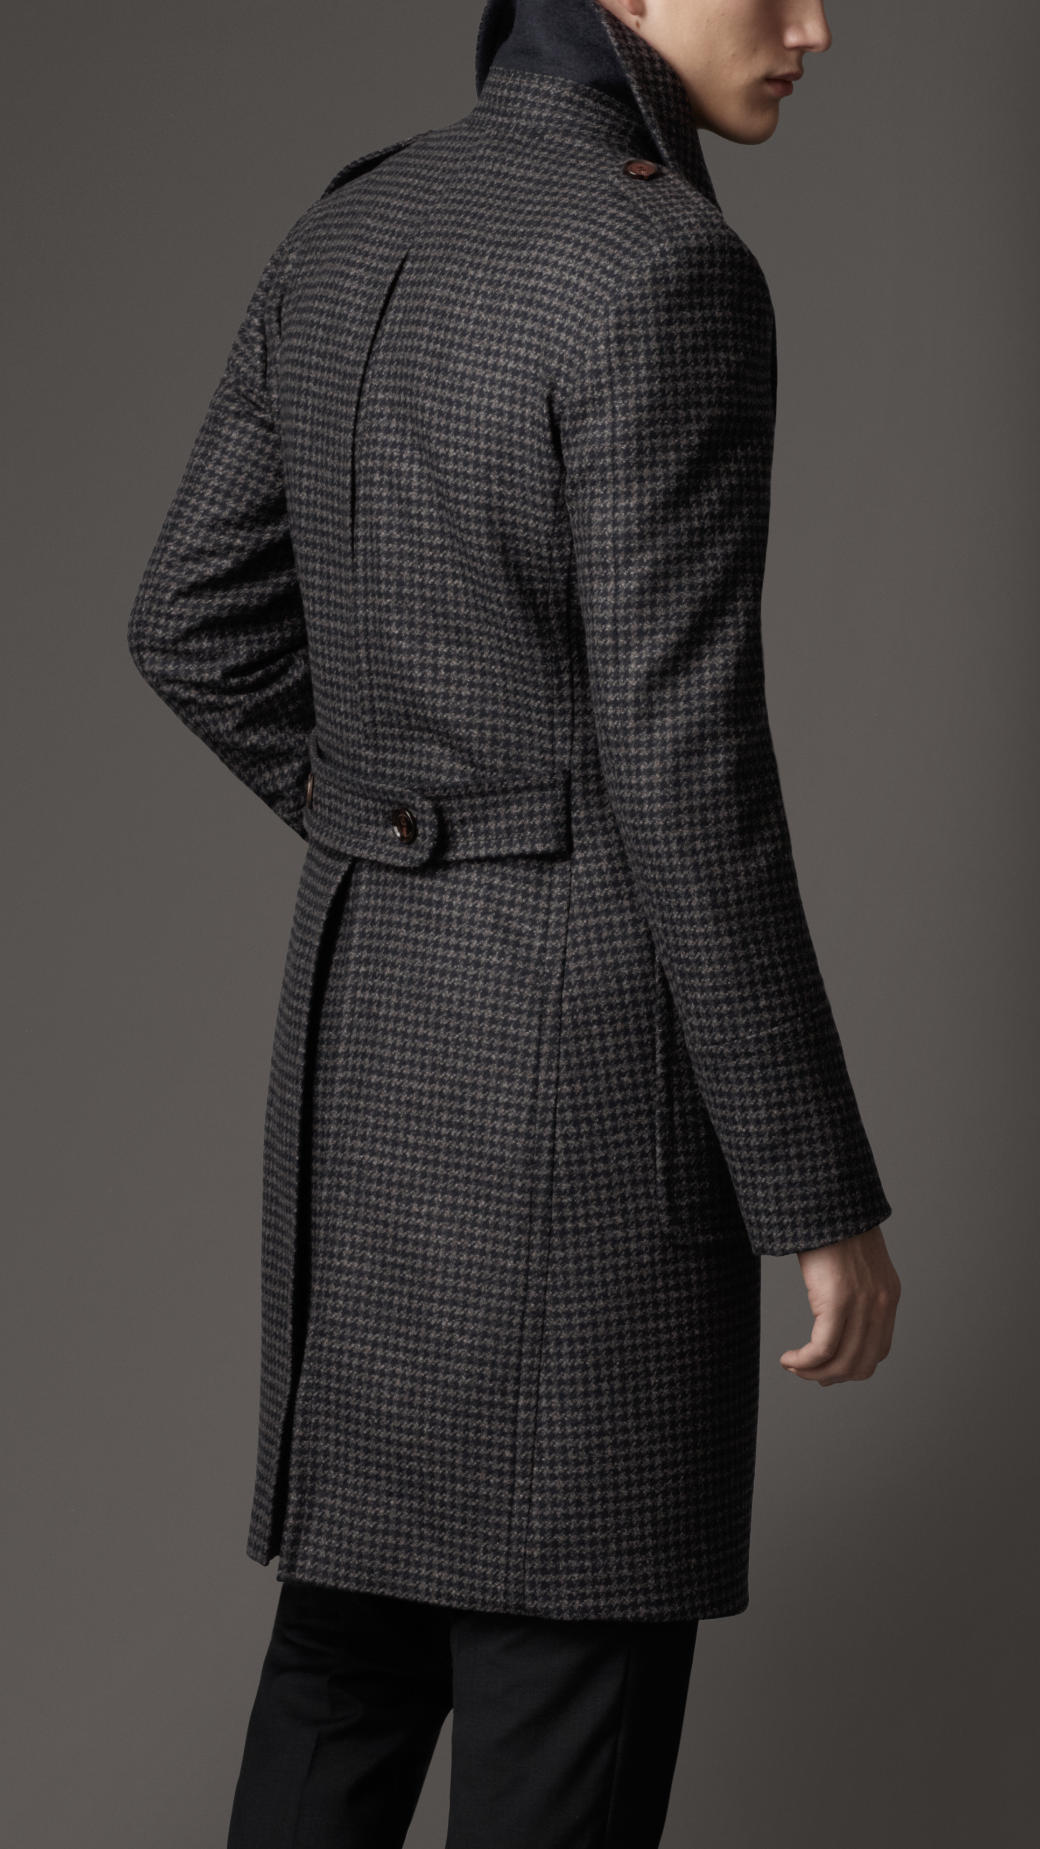 Lyst - Burberry Houndstooth Greatcoat in Blue for Men